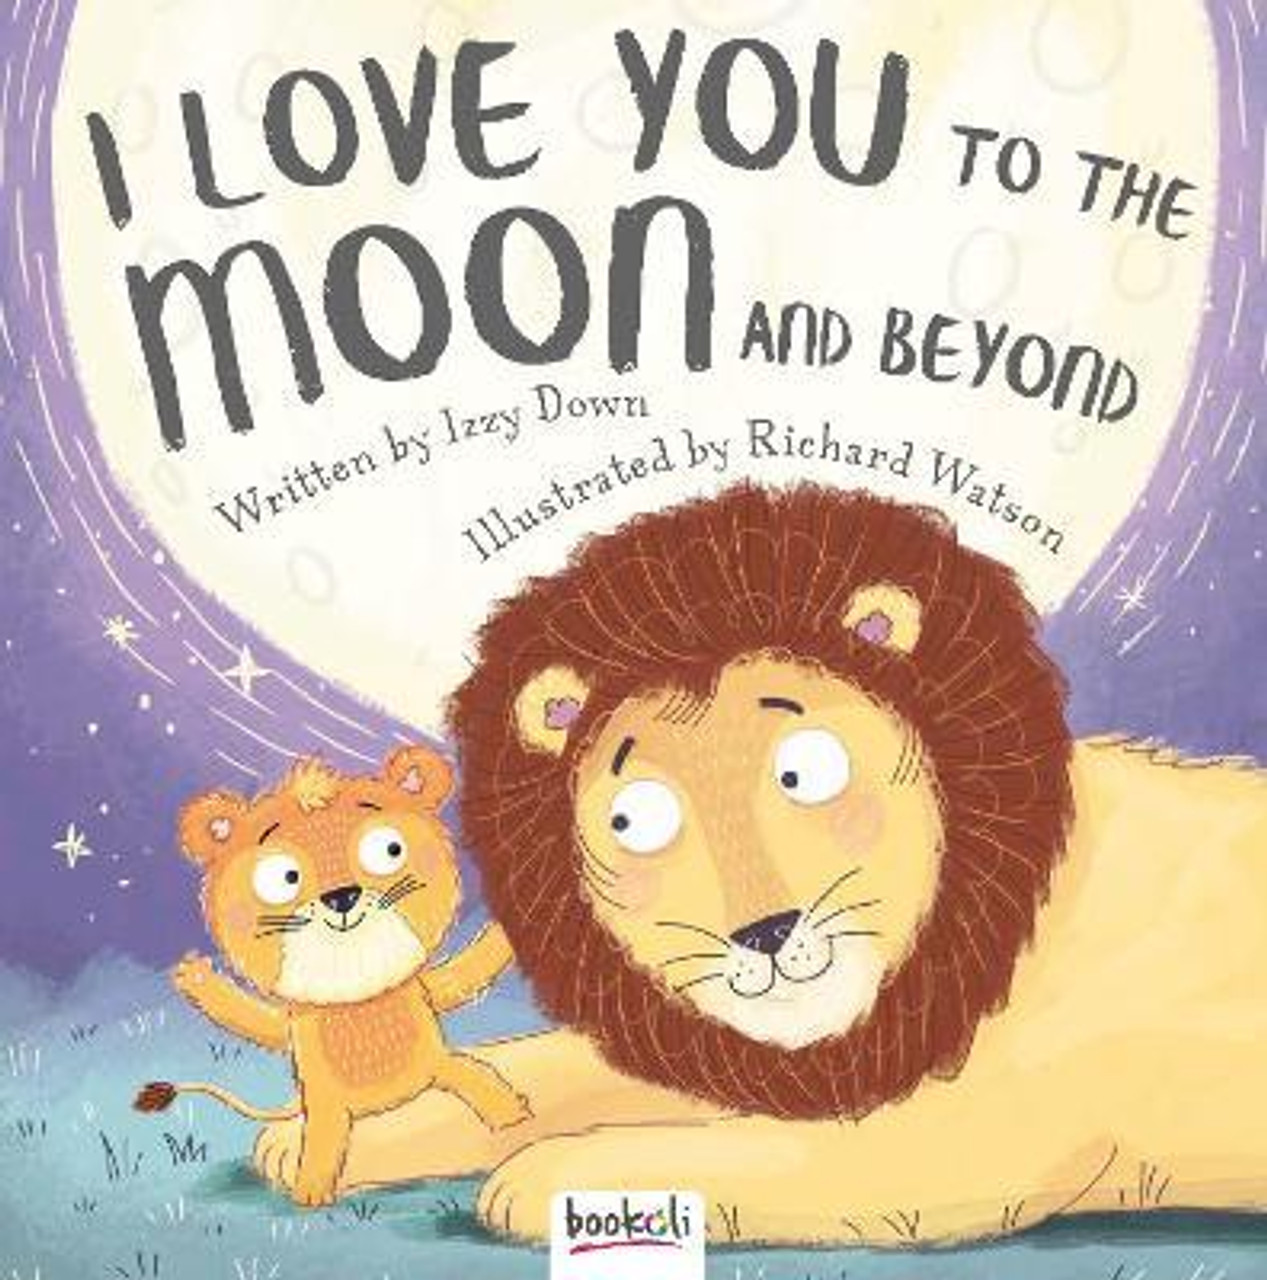 Izzy Down / I Love You to the Moon and Beyond (Children's Coffee Table book)